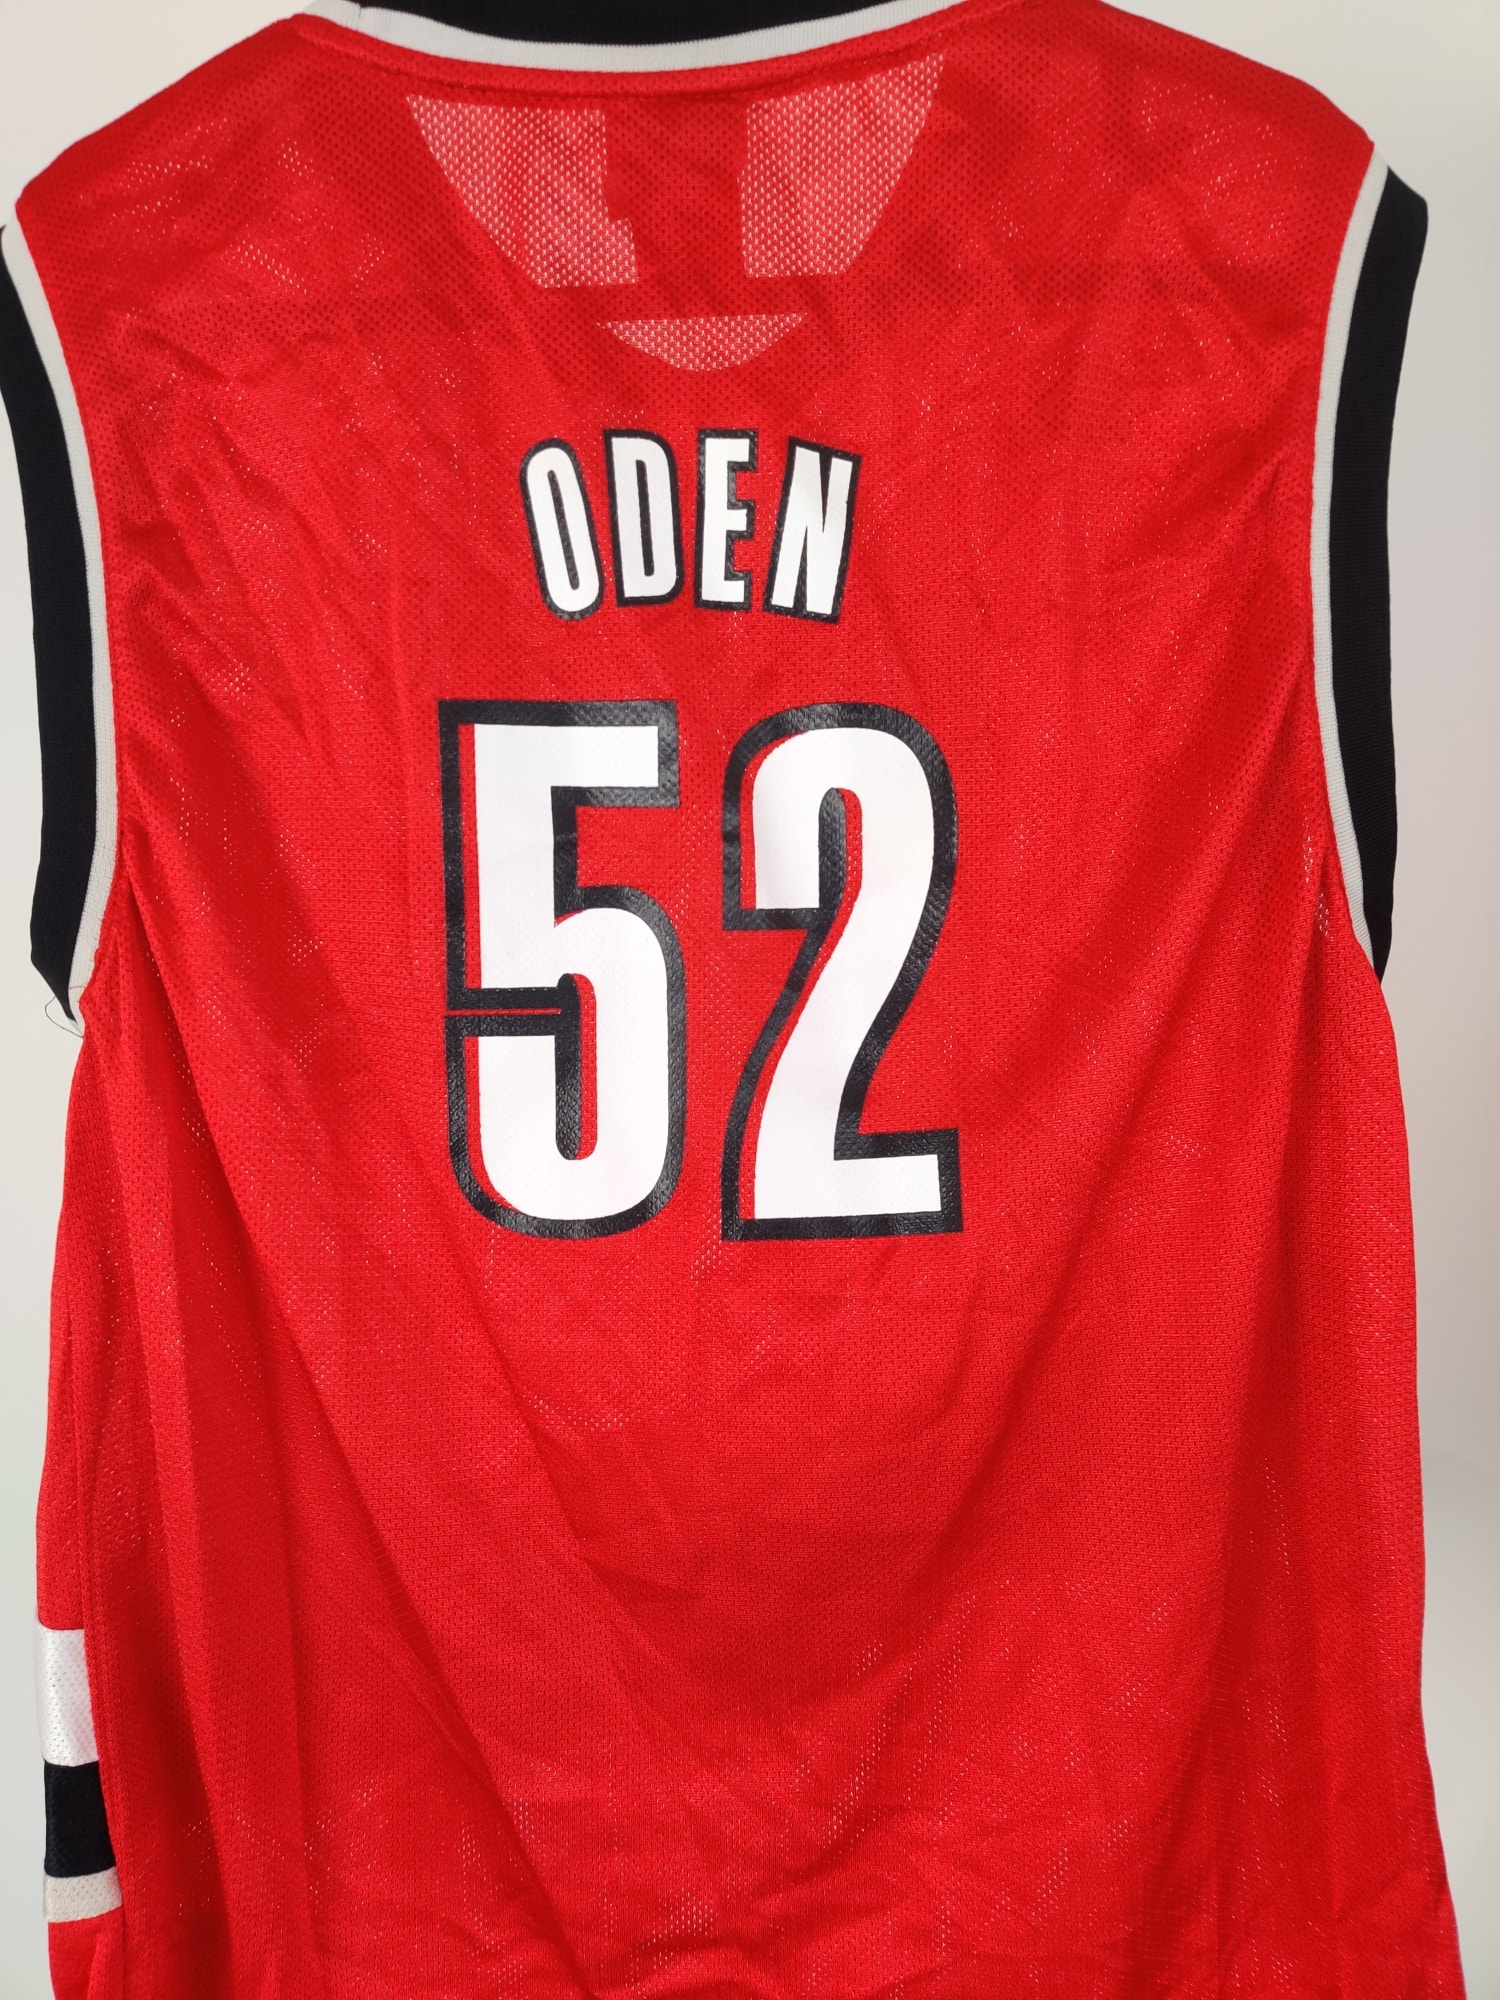 (V) Adidas NBA Portland Trail Blazers Youth jersey players Oden #52 sz XL  - Picture 6 of 11